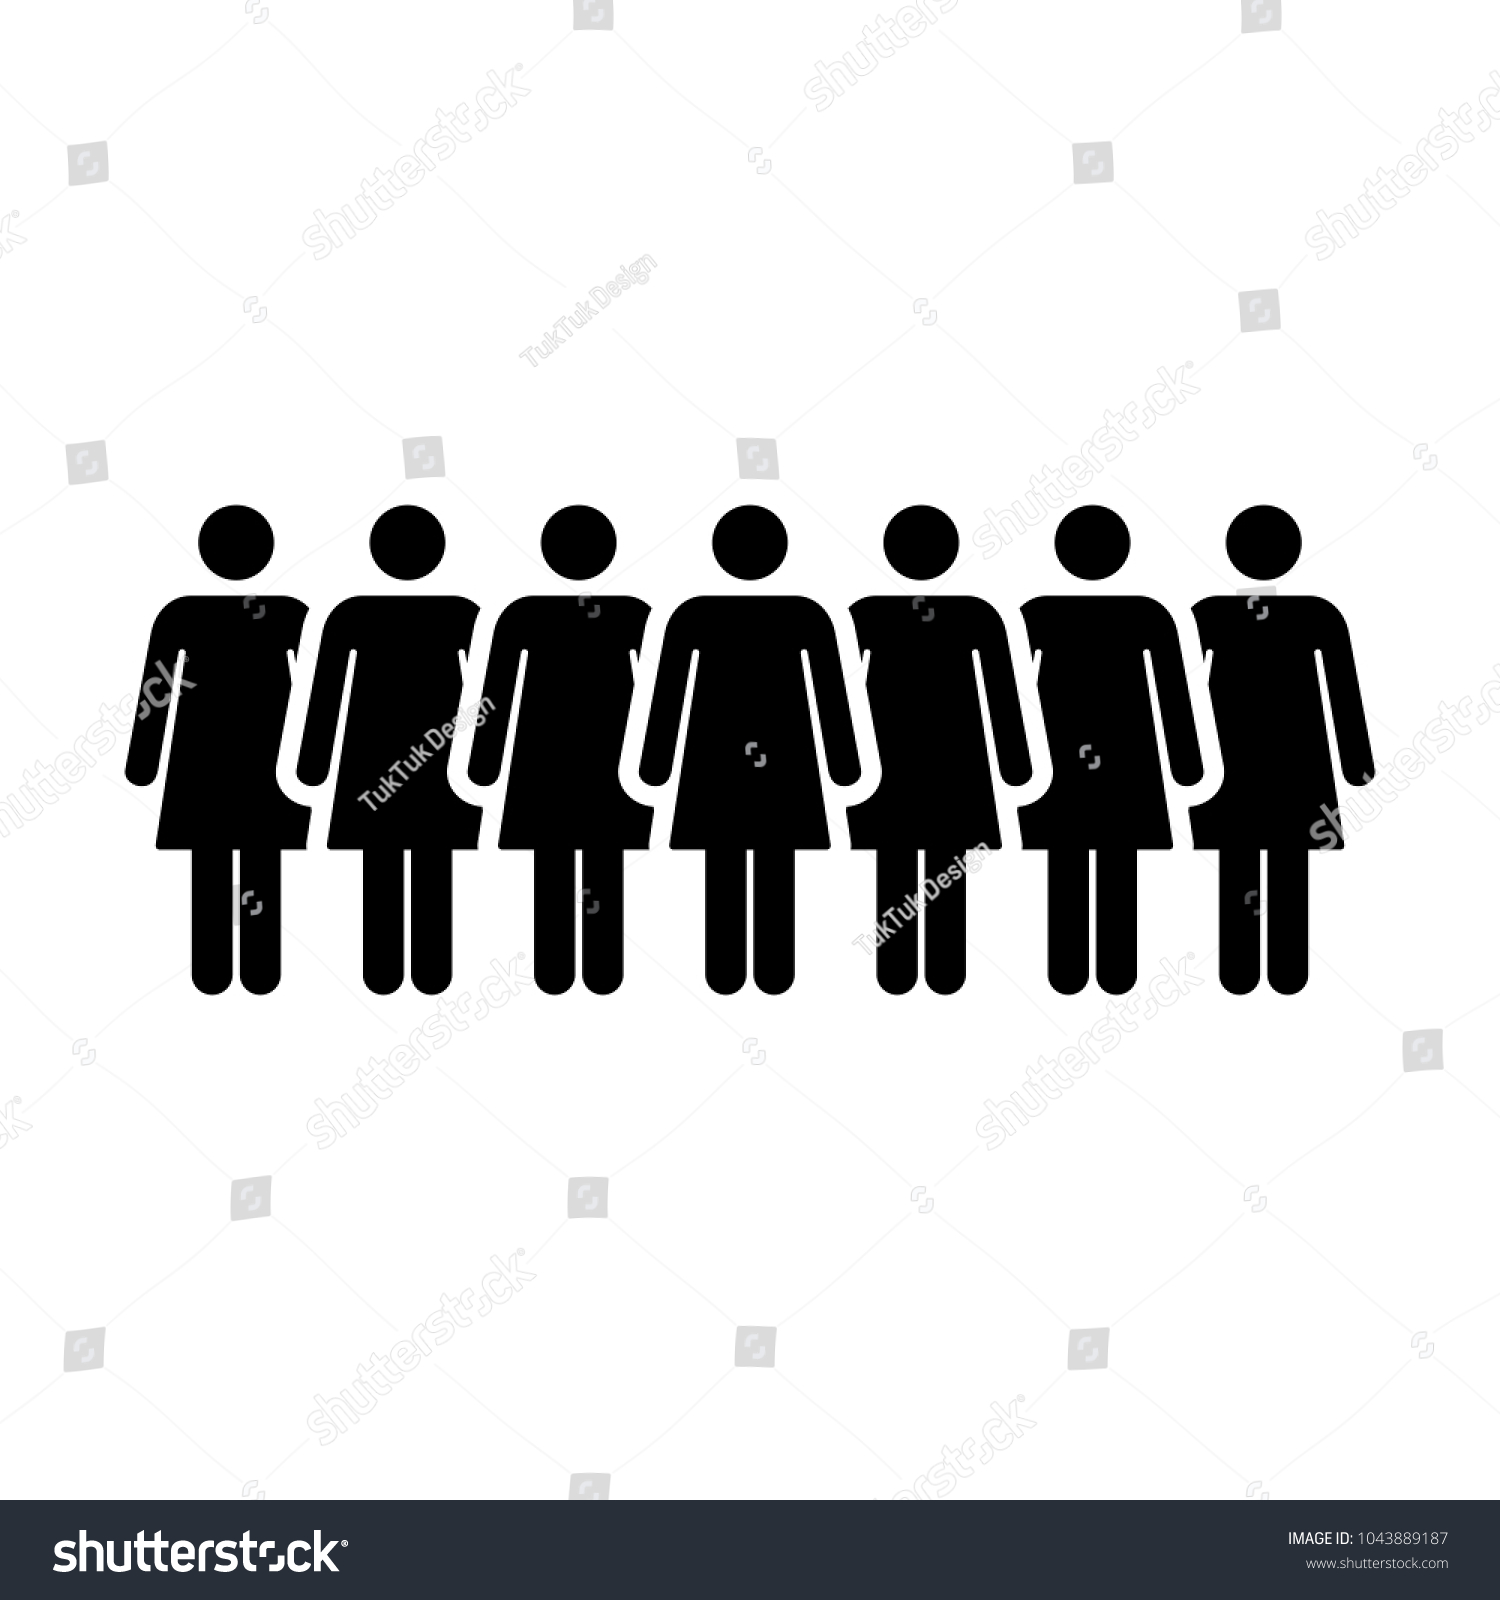 People Icon Vector Group Women Team Stock Vector Royalty Free